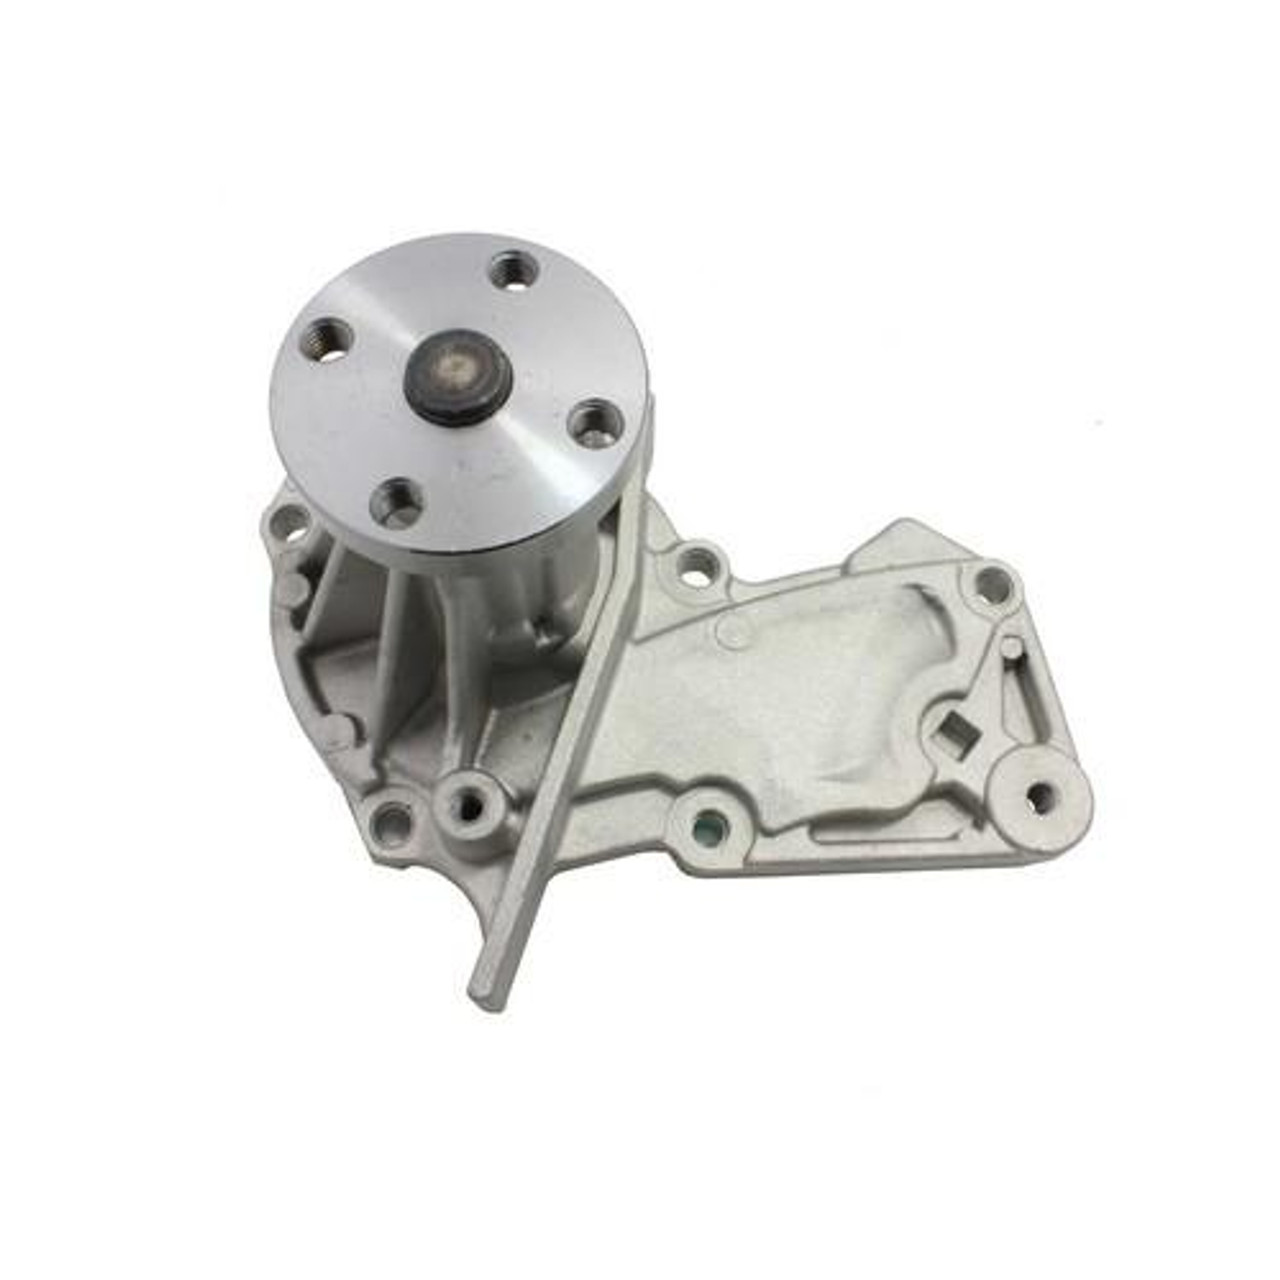 Water Pump - 2015 Ford Fiesta 1.6L Engine Parts # WP4314ZE6